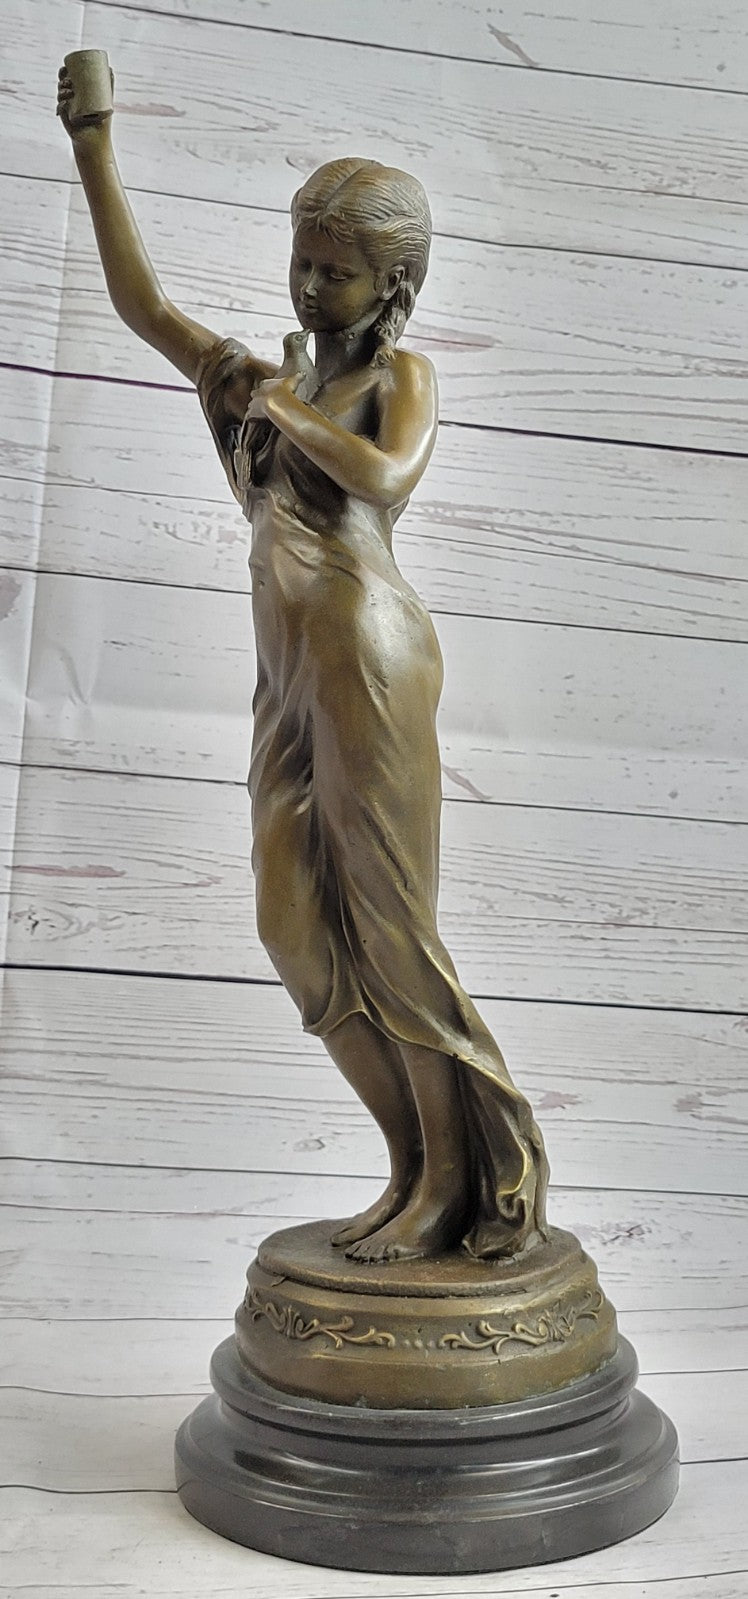 Handcrafted bronze sculpture SALE Nouve Art Patoue Posing Cautiously Lady Young